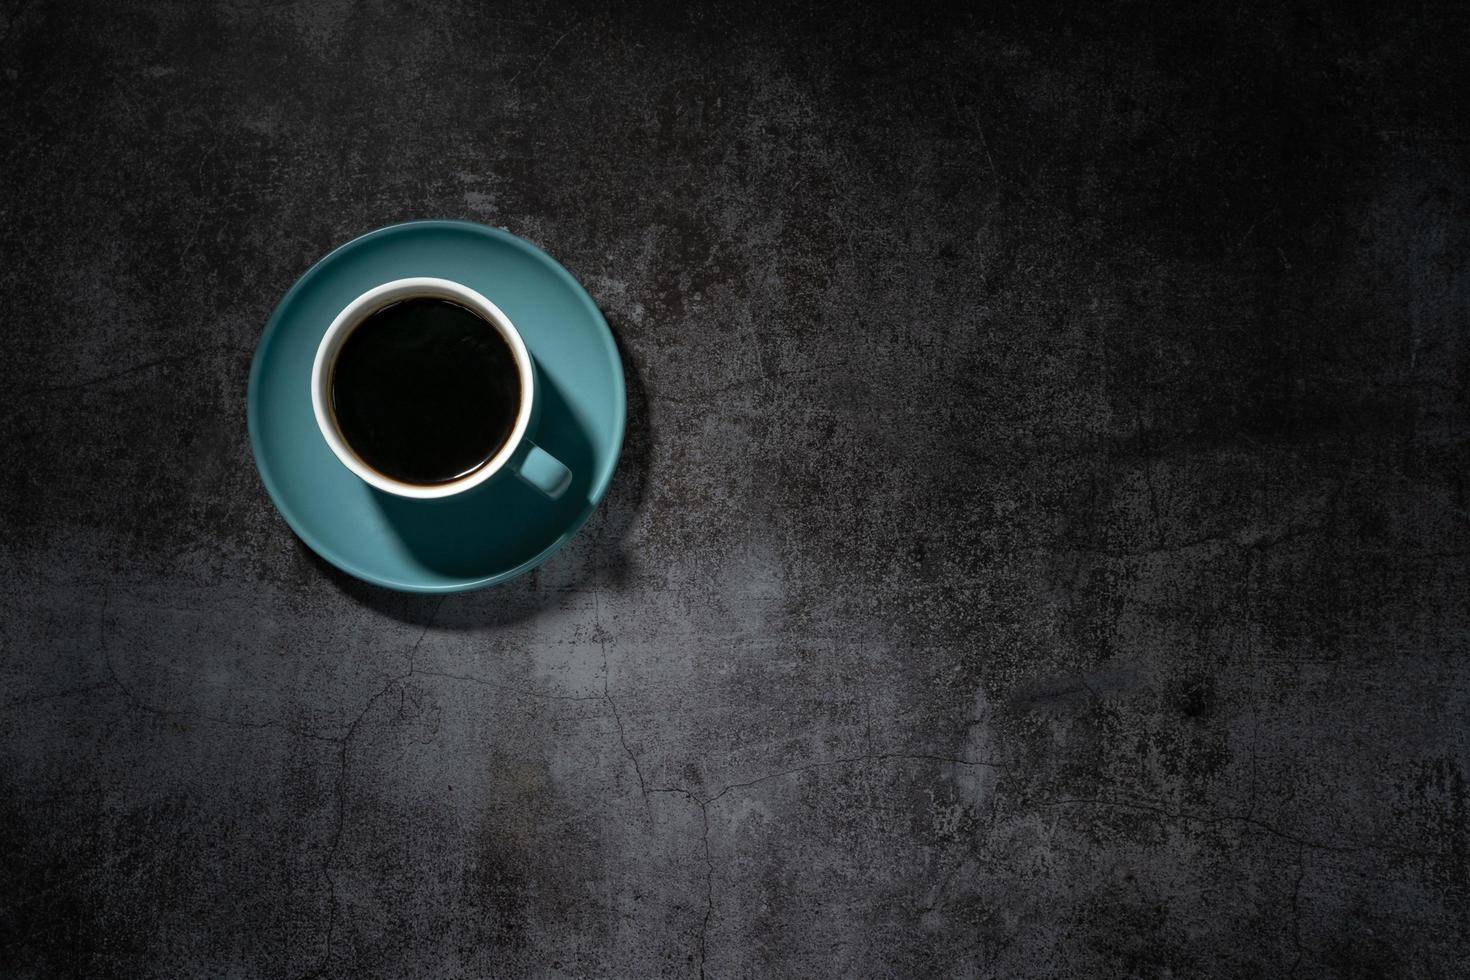 black coffee in a blue ceramic cup on the old gray cement floor photo